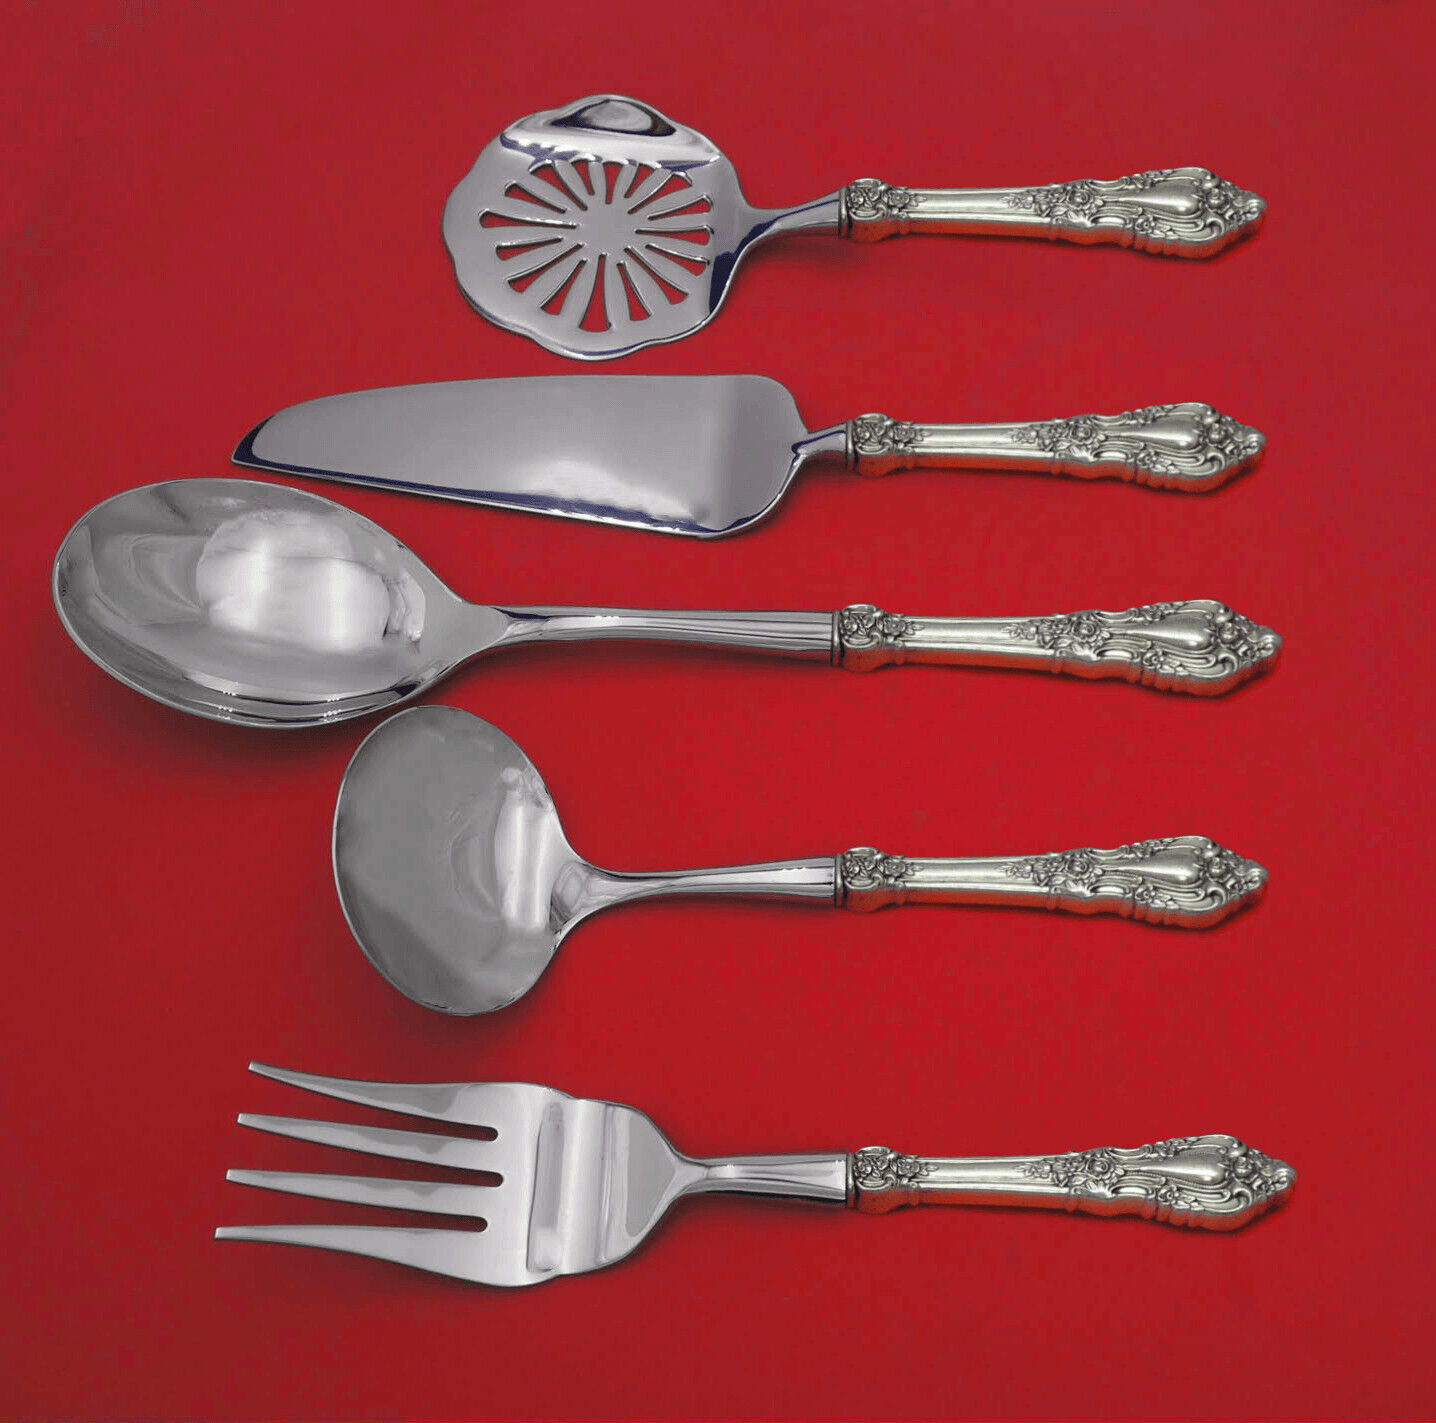 Primary image for Eloquence by Lunt Sterling Silver Thanksgiving Serving Set 5pc HH WS Custom